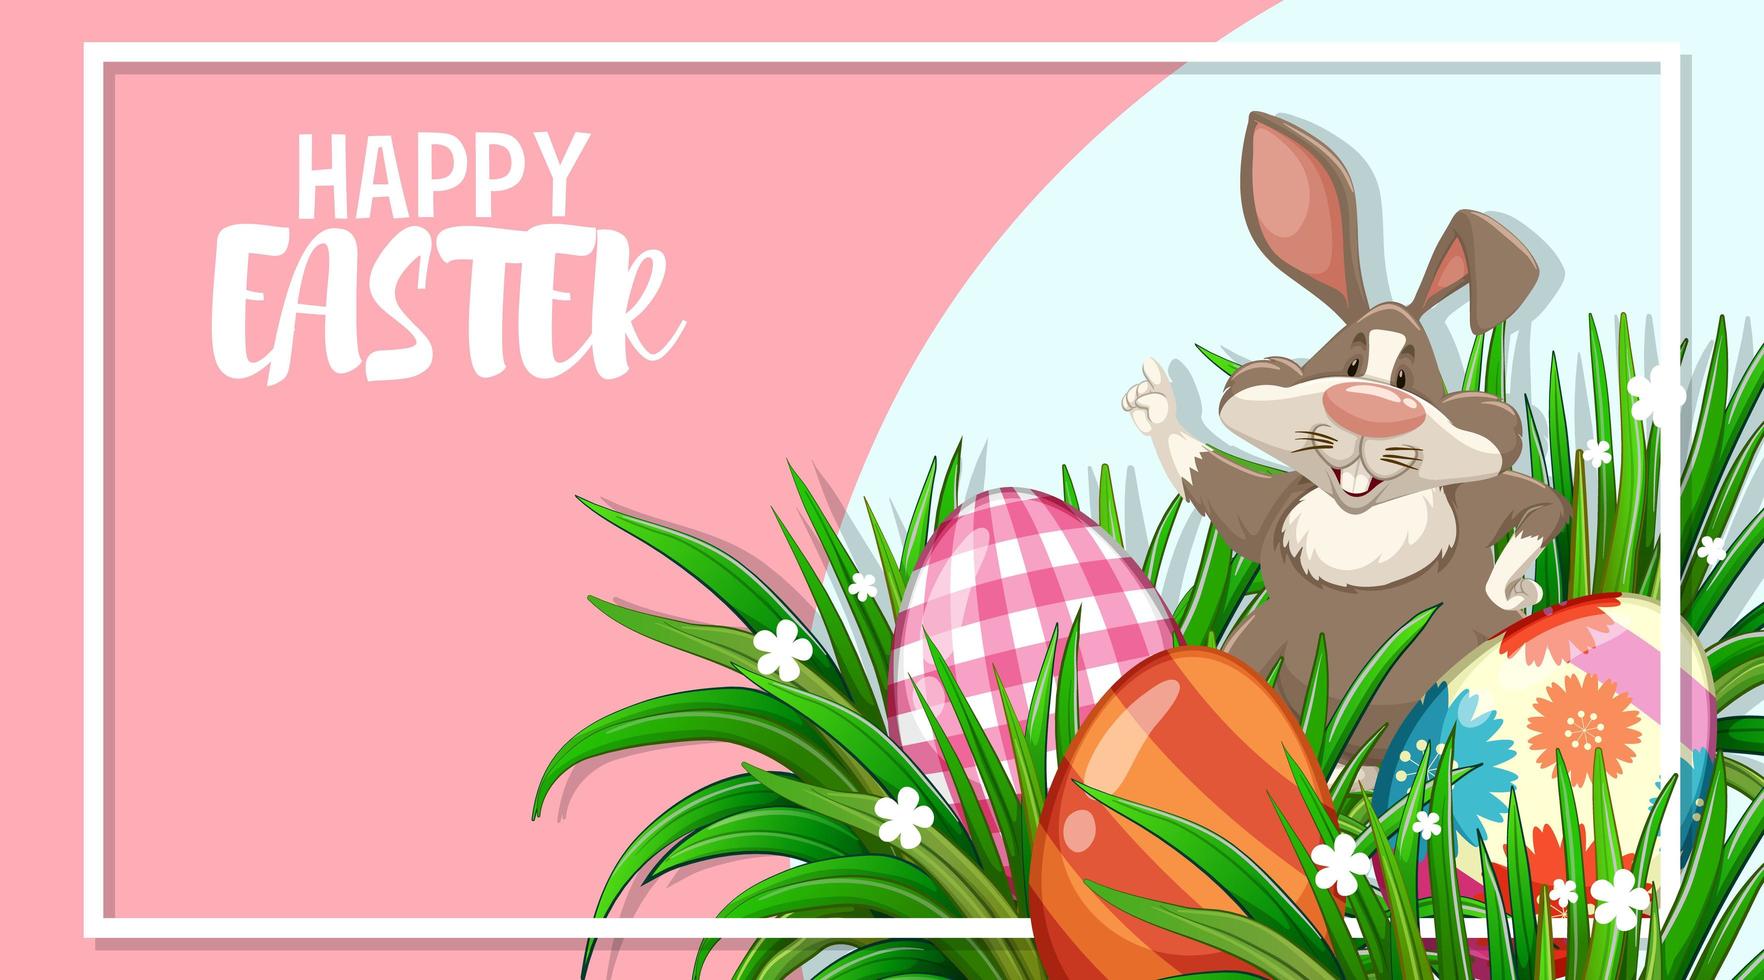 Easter Design with Rabbit and Painted Eggs in Frame vector